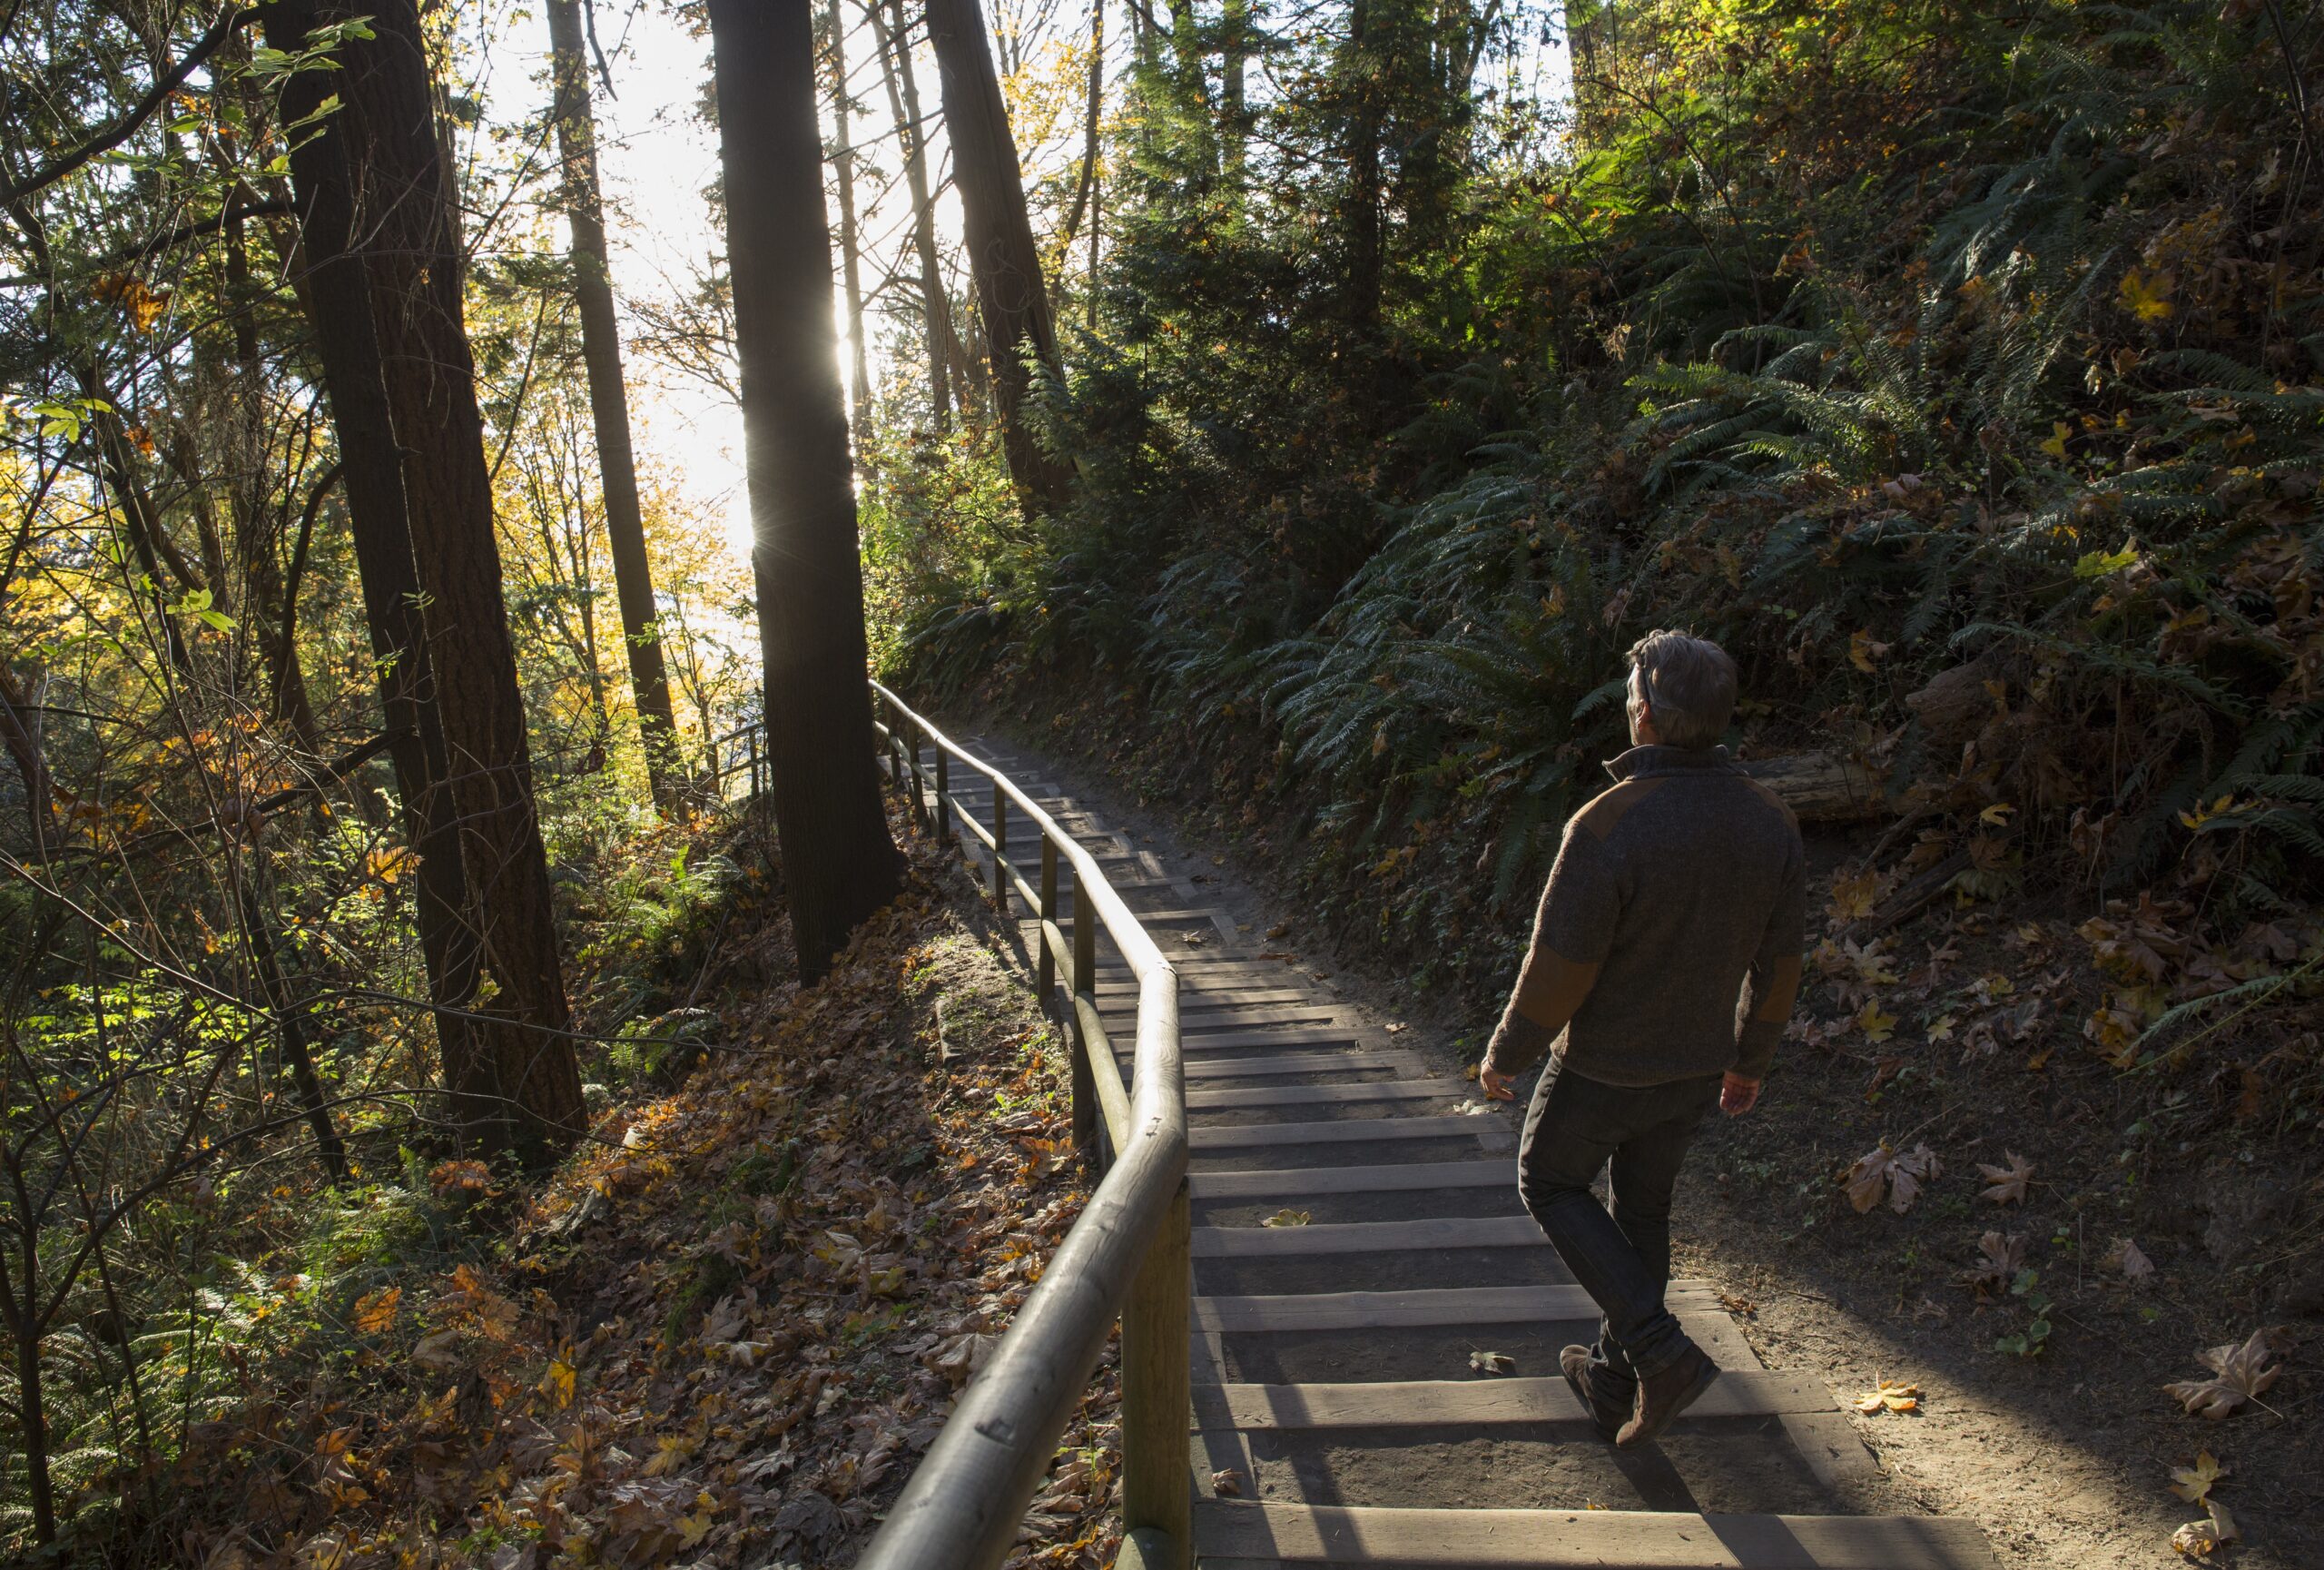 To look at BC climate factors, a man is walking down some stairs with railing to the left side into a wooded area that's lit up by the sun.